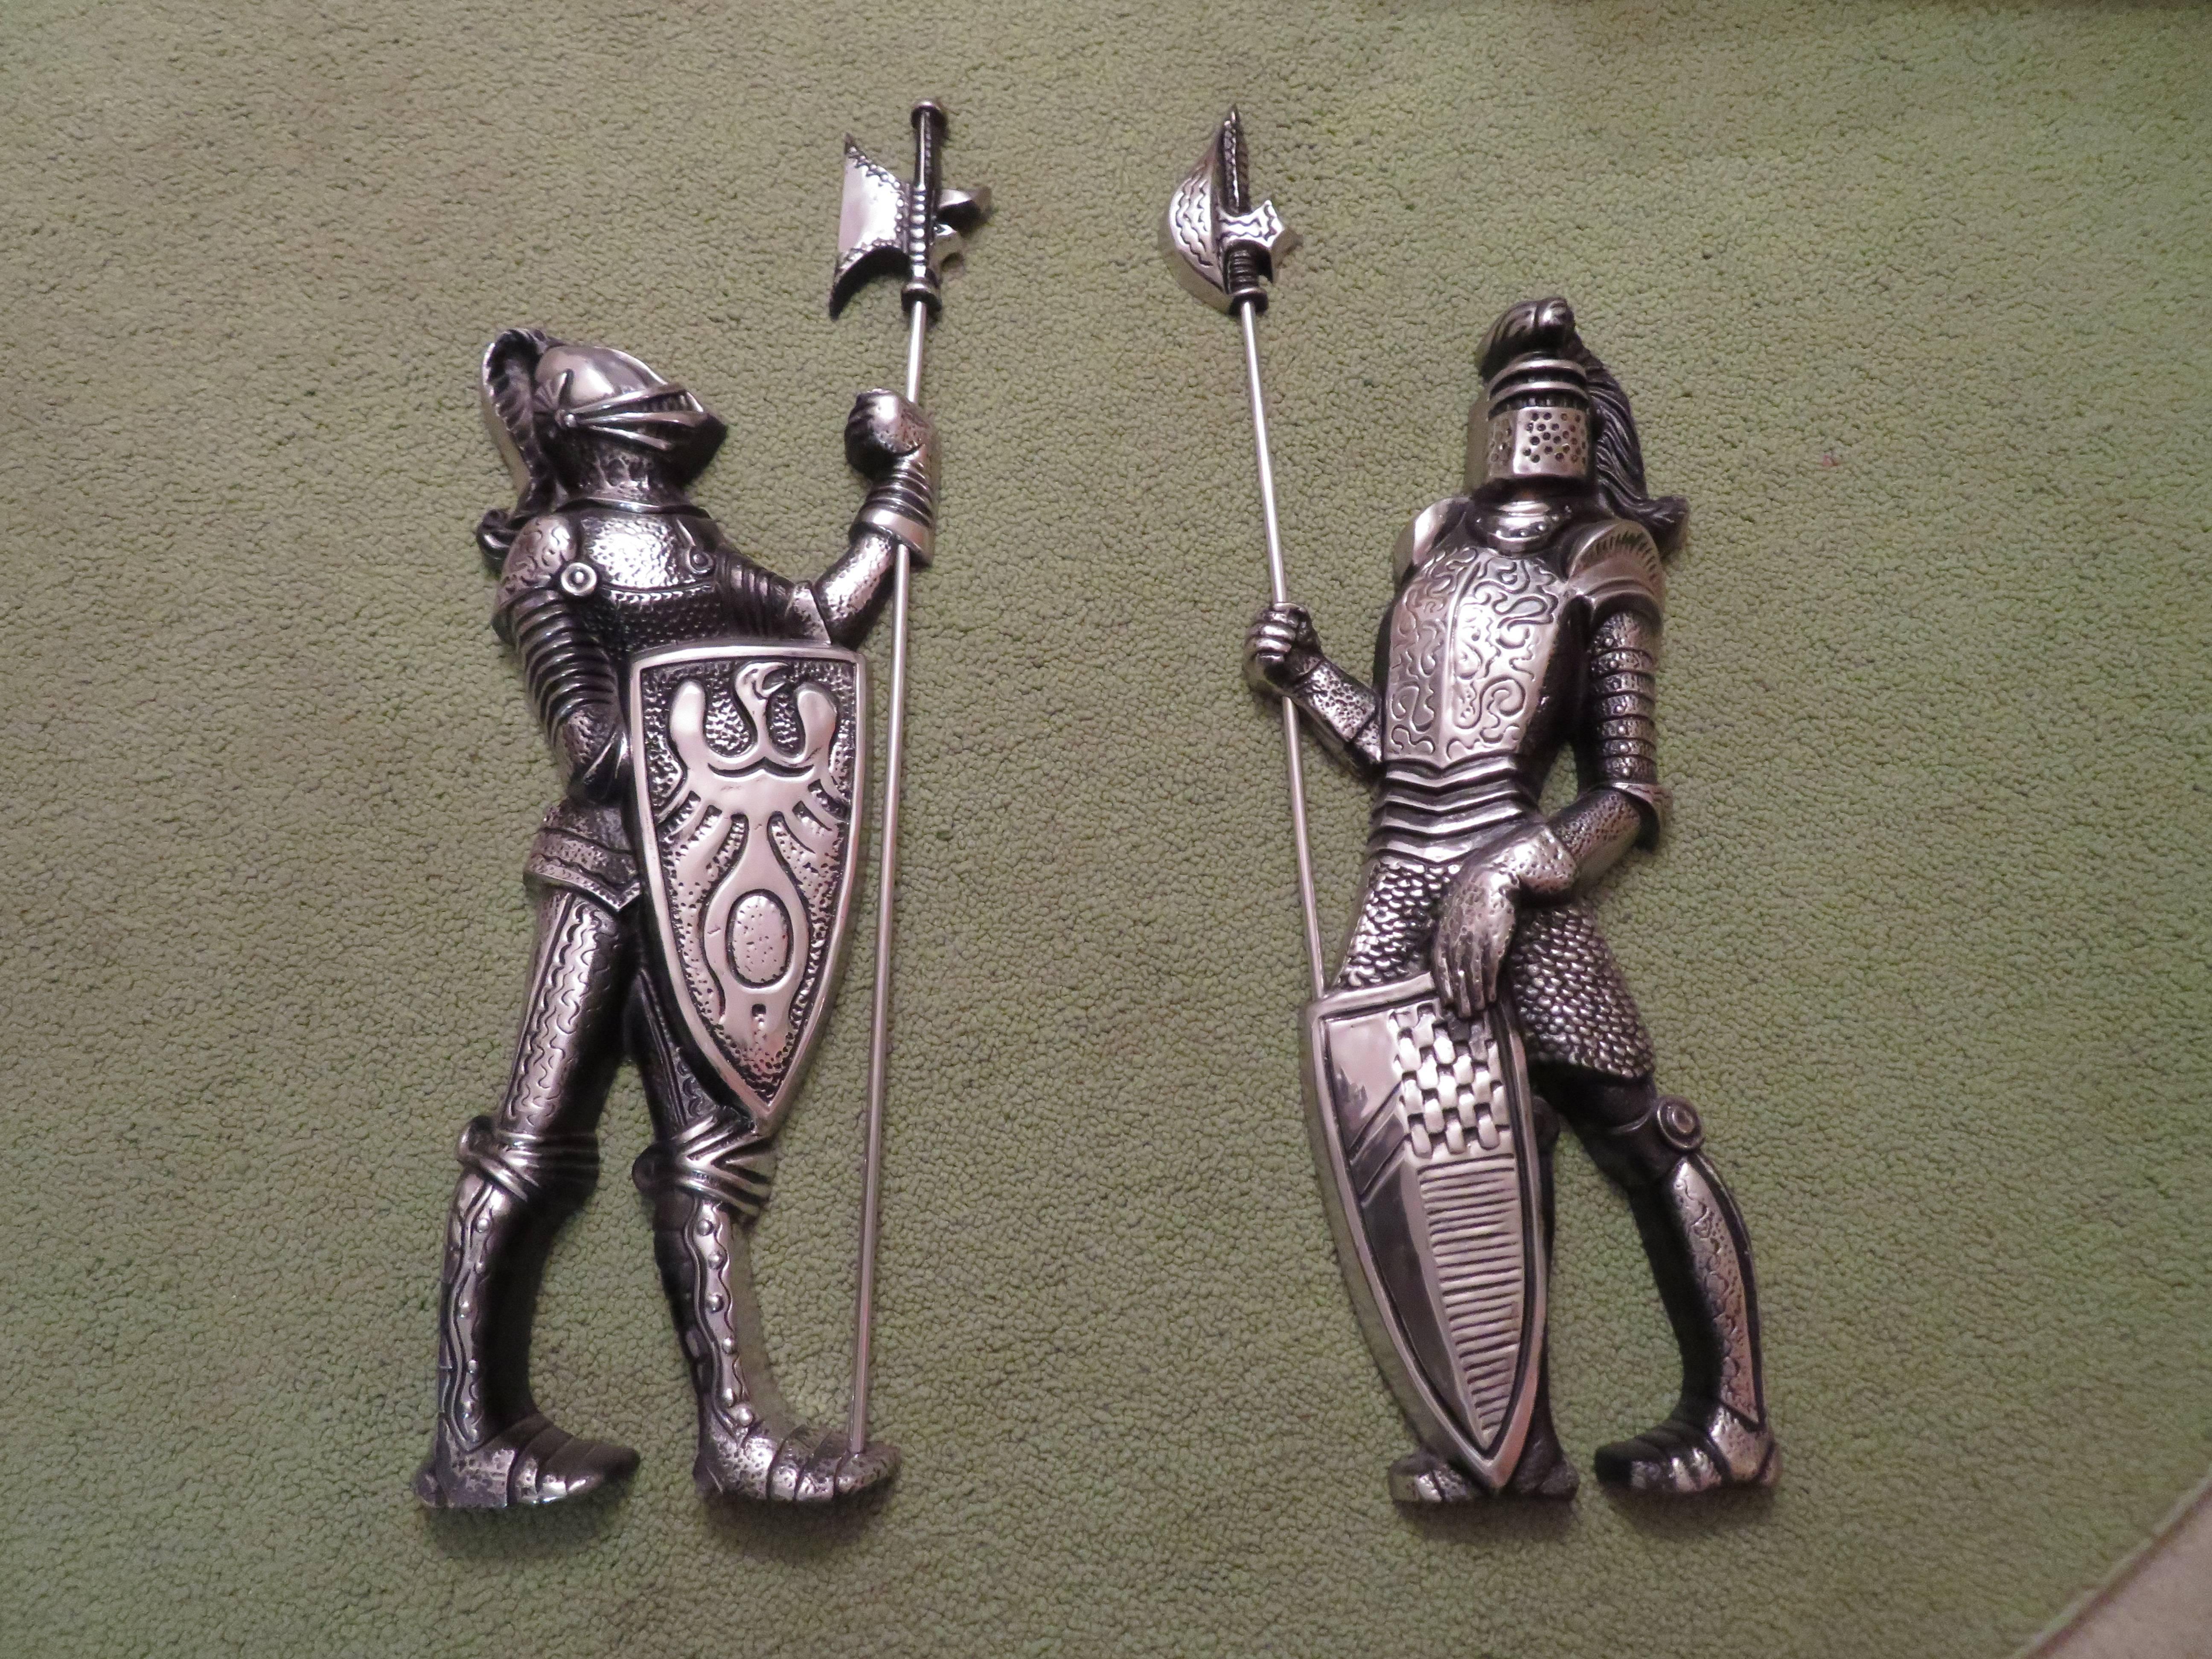 Medieval style lion coat of arms shield with two knights in armor from the midcentury. This vintage cast aluminum set is well crafted and is quite nice. The knights measure 35